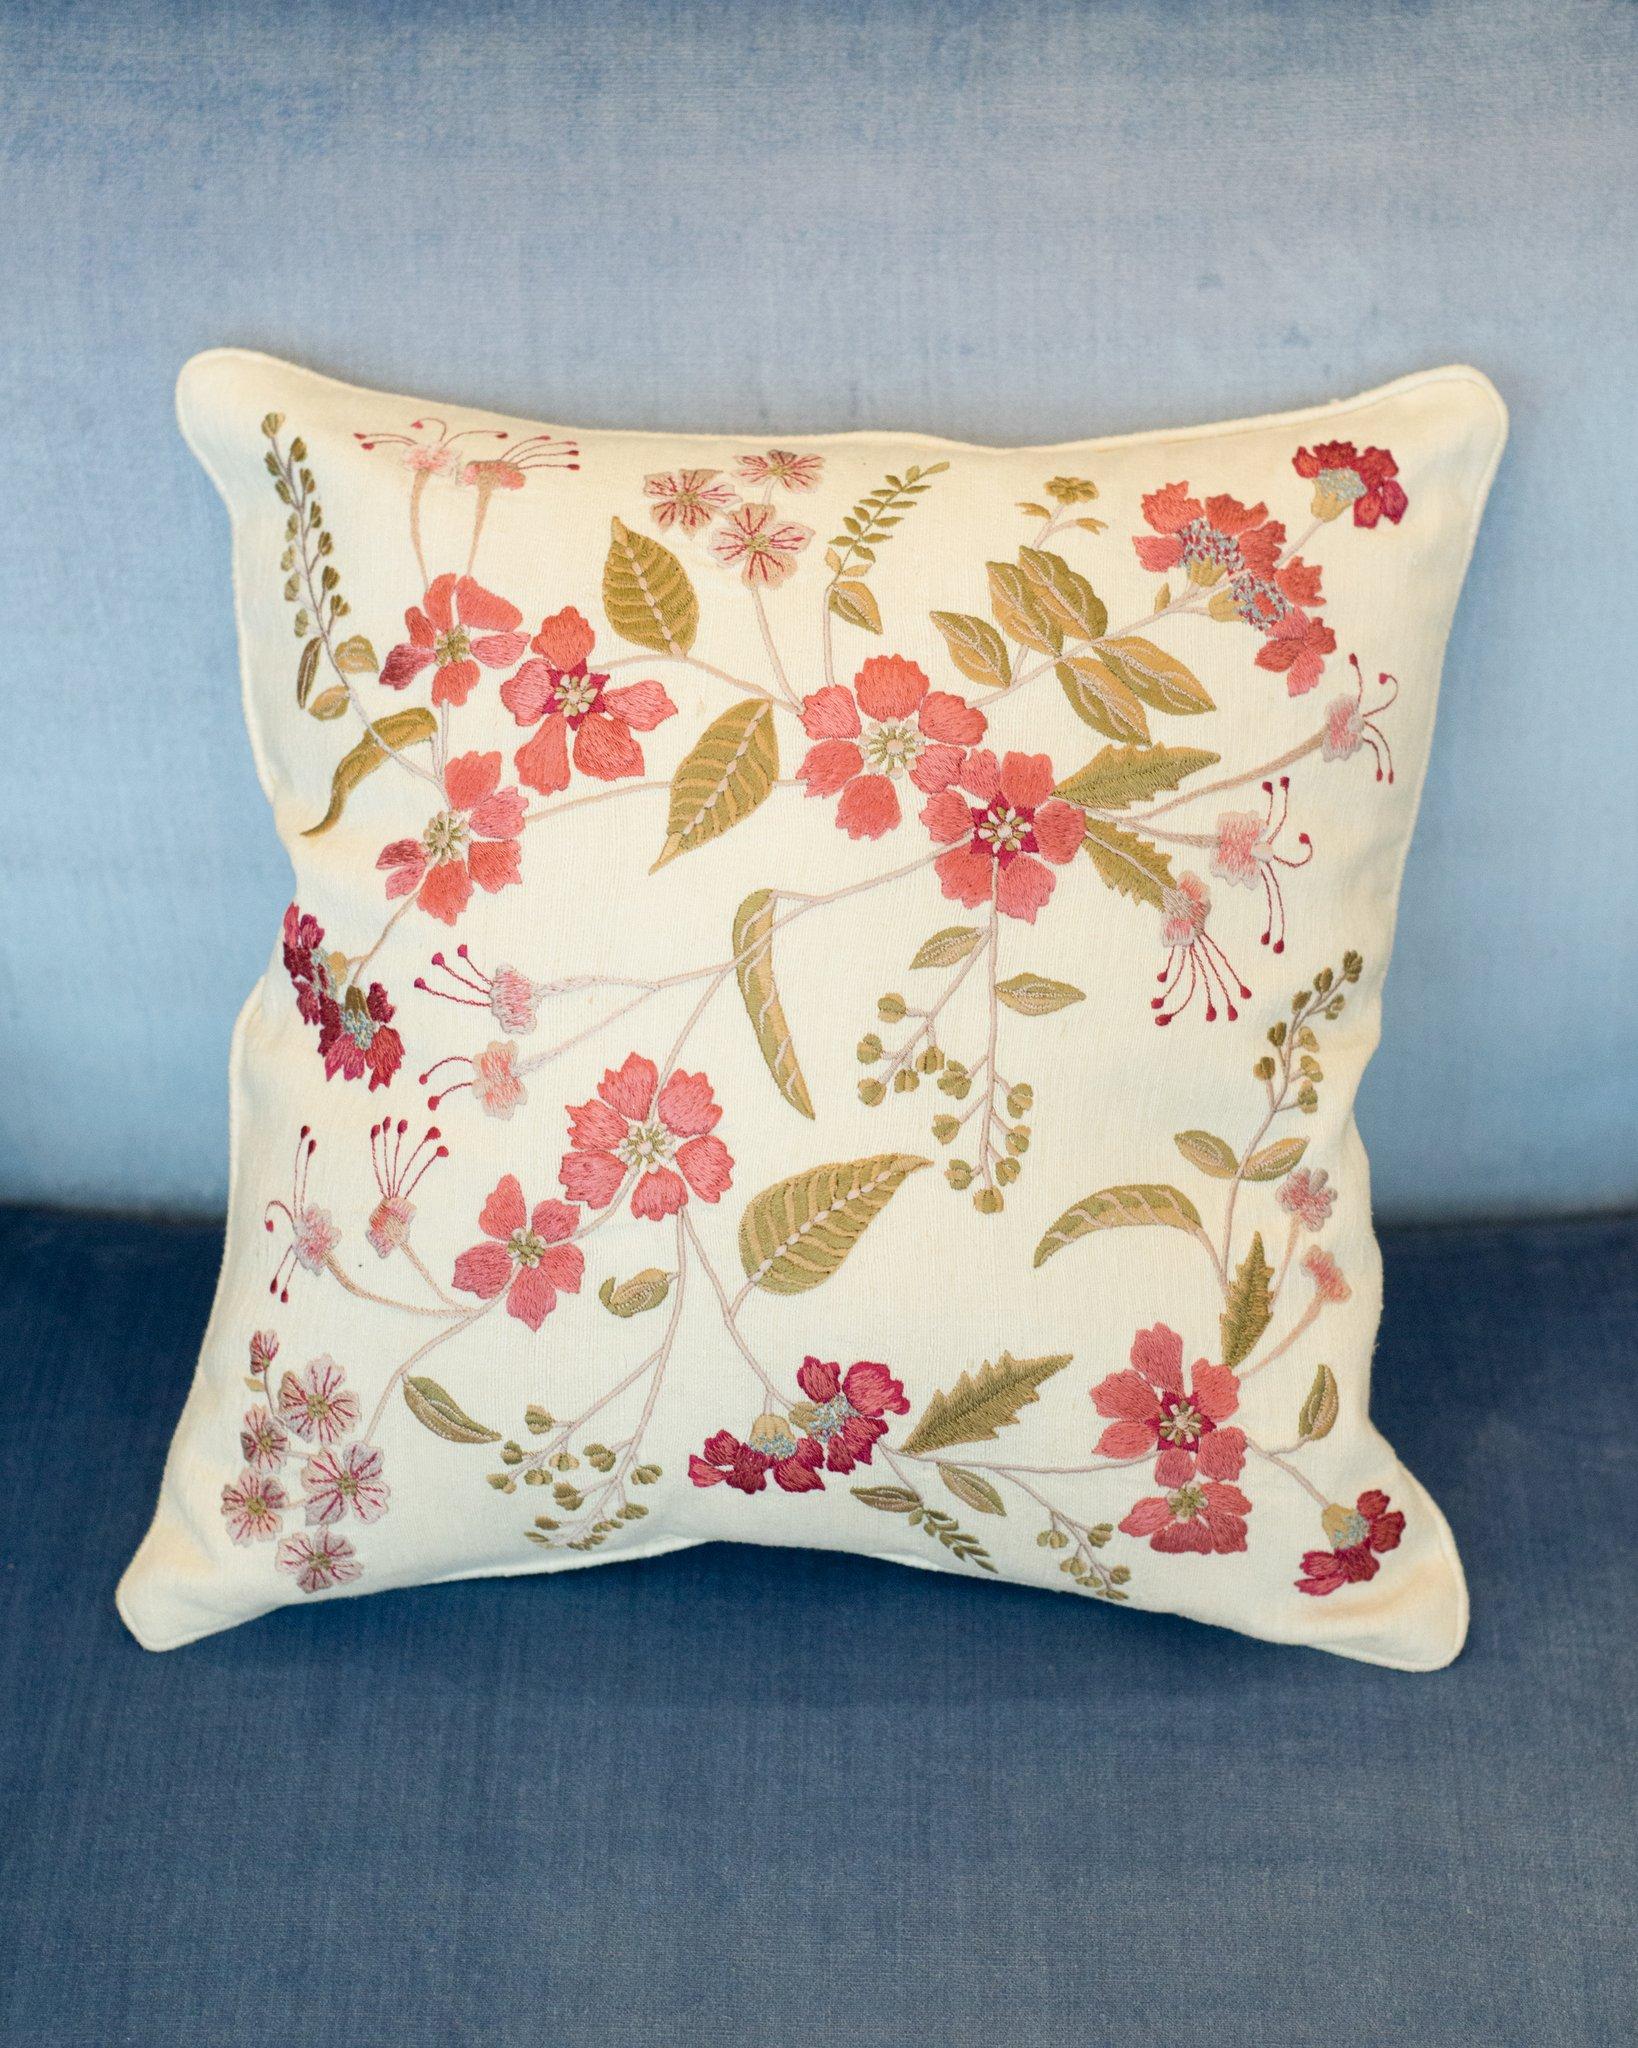 A pair of cotton cushions from Anke Dreschel featuring ornate floral embroidery, square shape and concealed rear zip fastening. Filled with 100% Canadian feather and down.